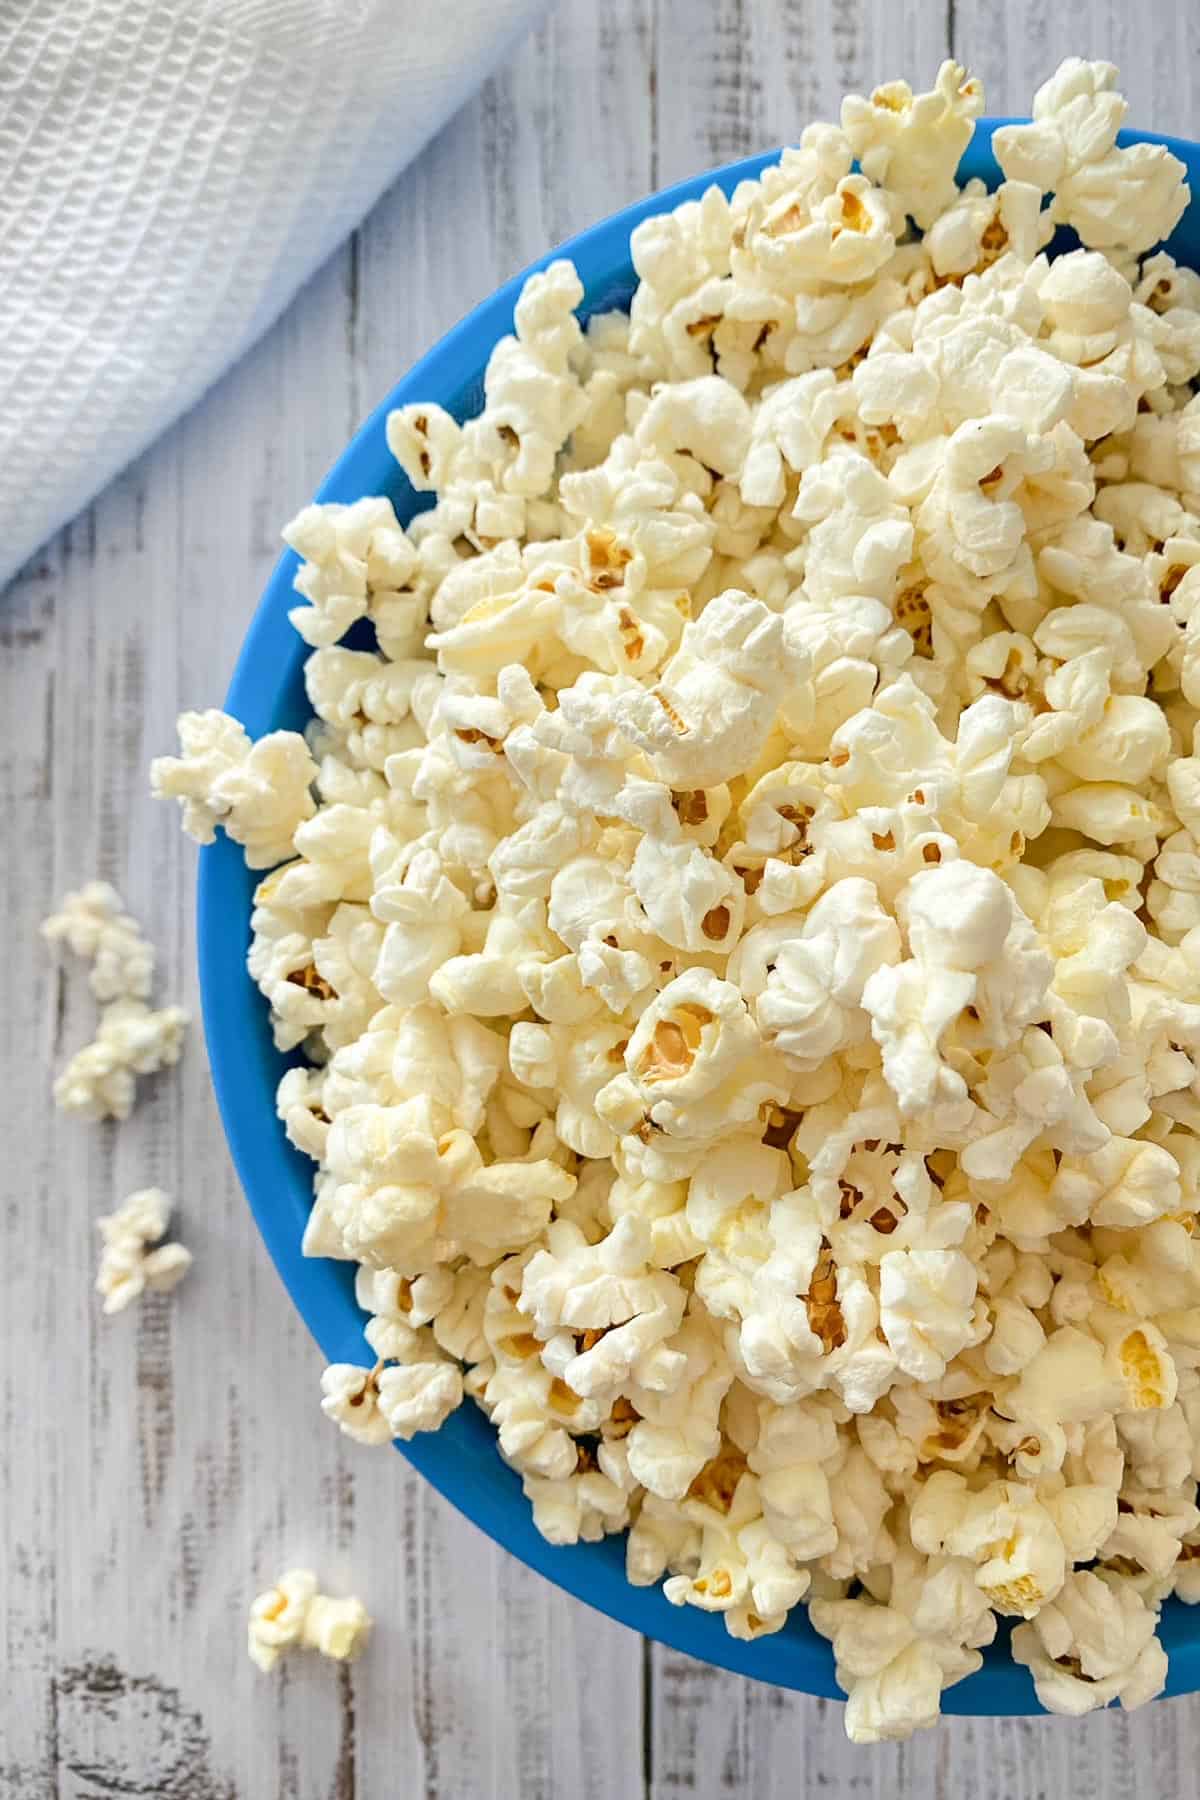 Blue bowl overfilled with popcorn that's spilling over the sides.